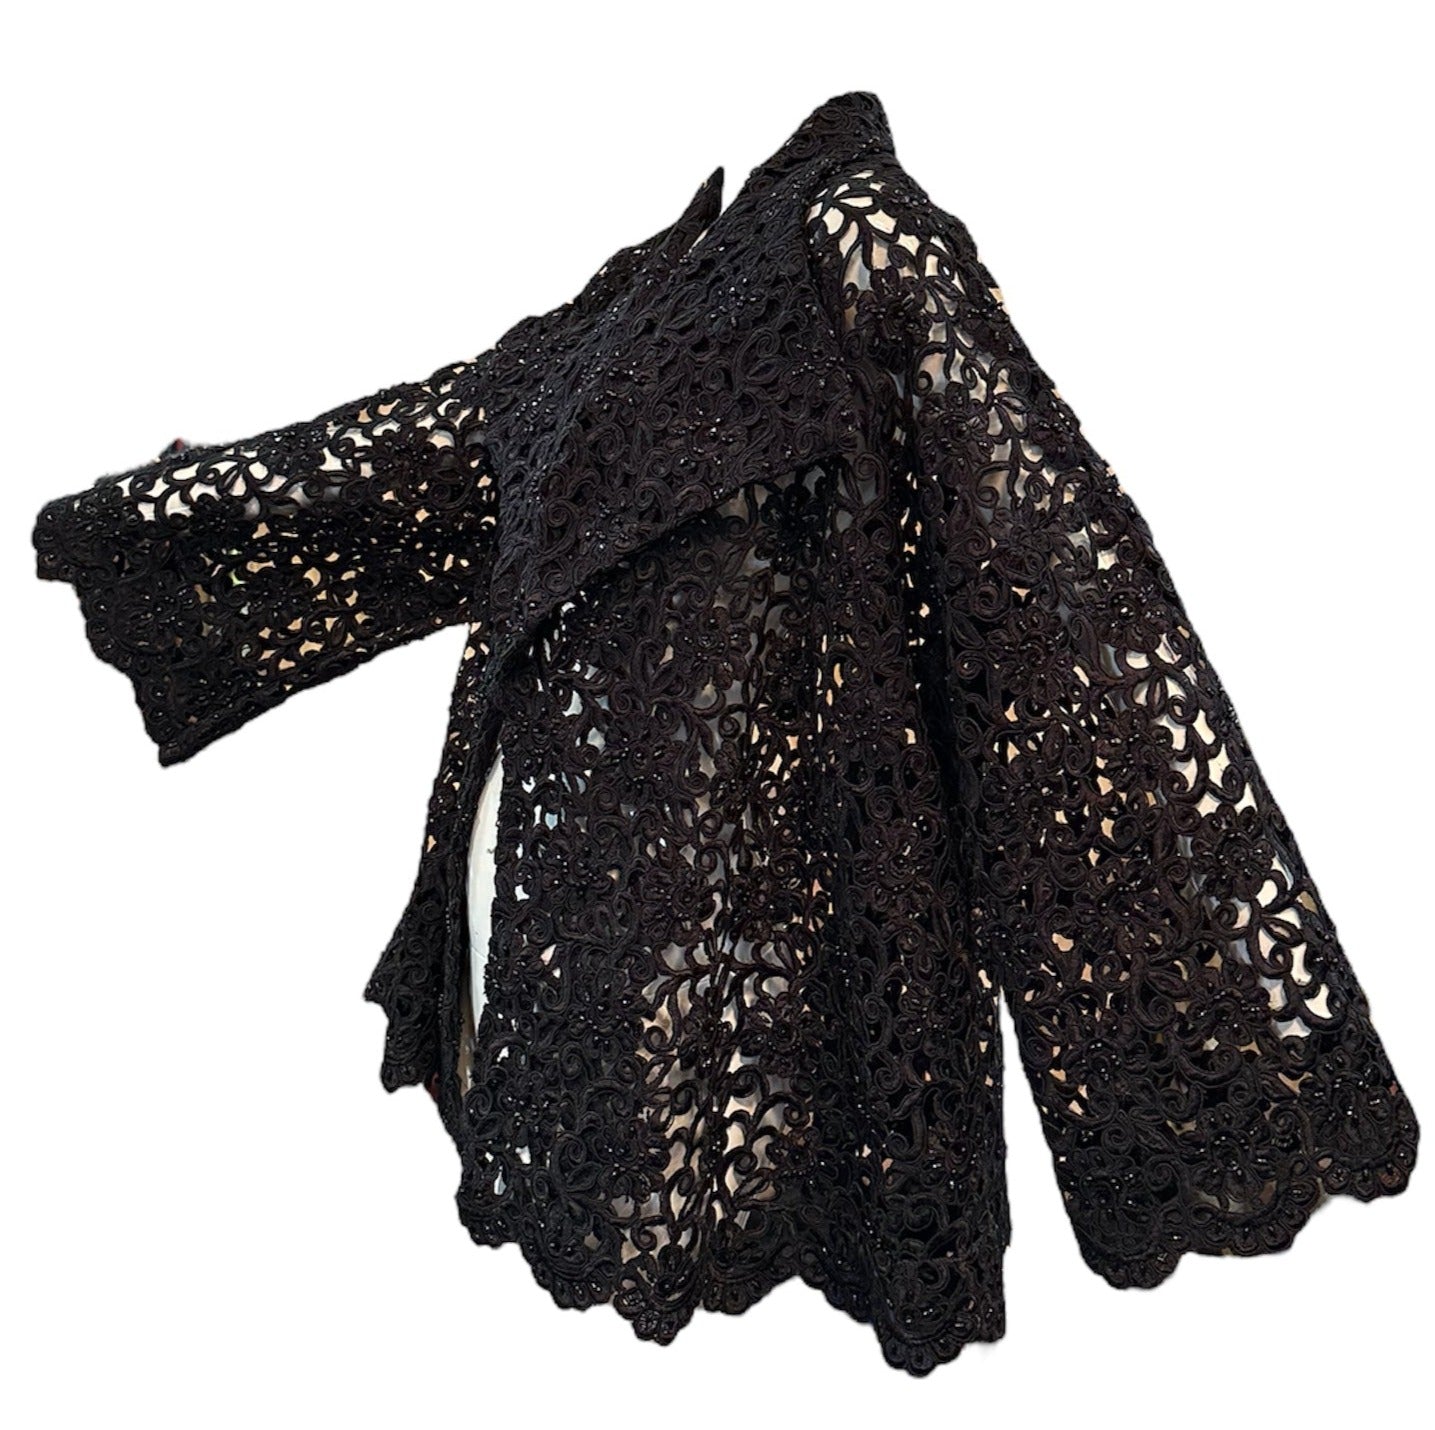 Gorgeous Black Cutwork Lace Evening Jacket Dotted with Beading SIDE 3 of 6